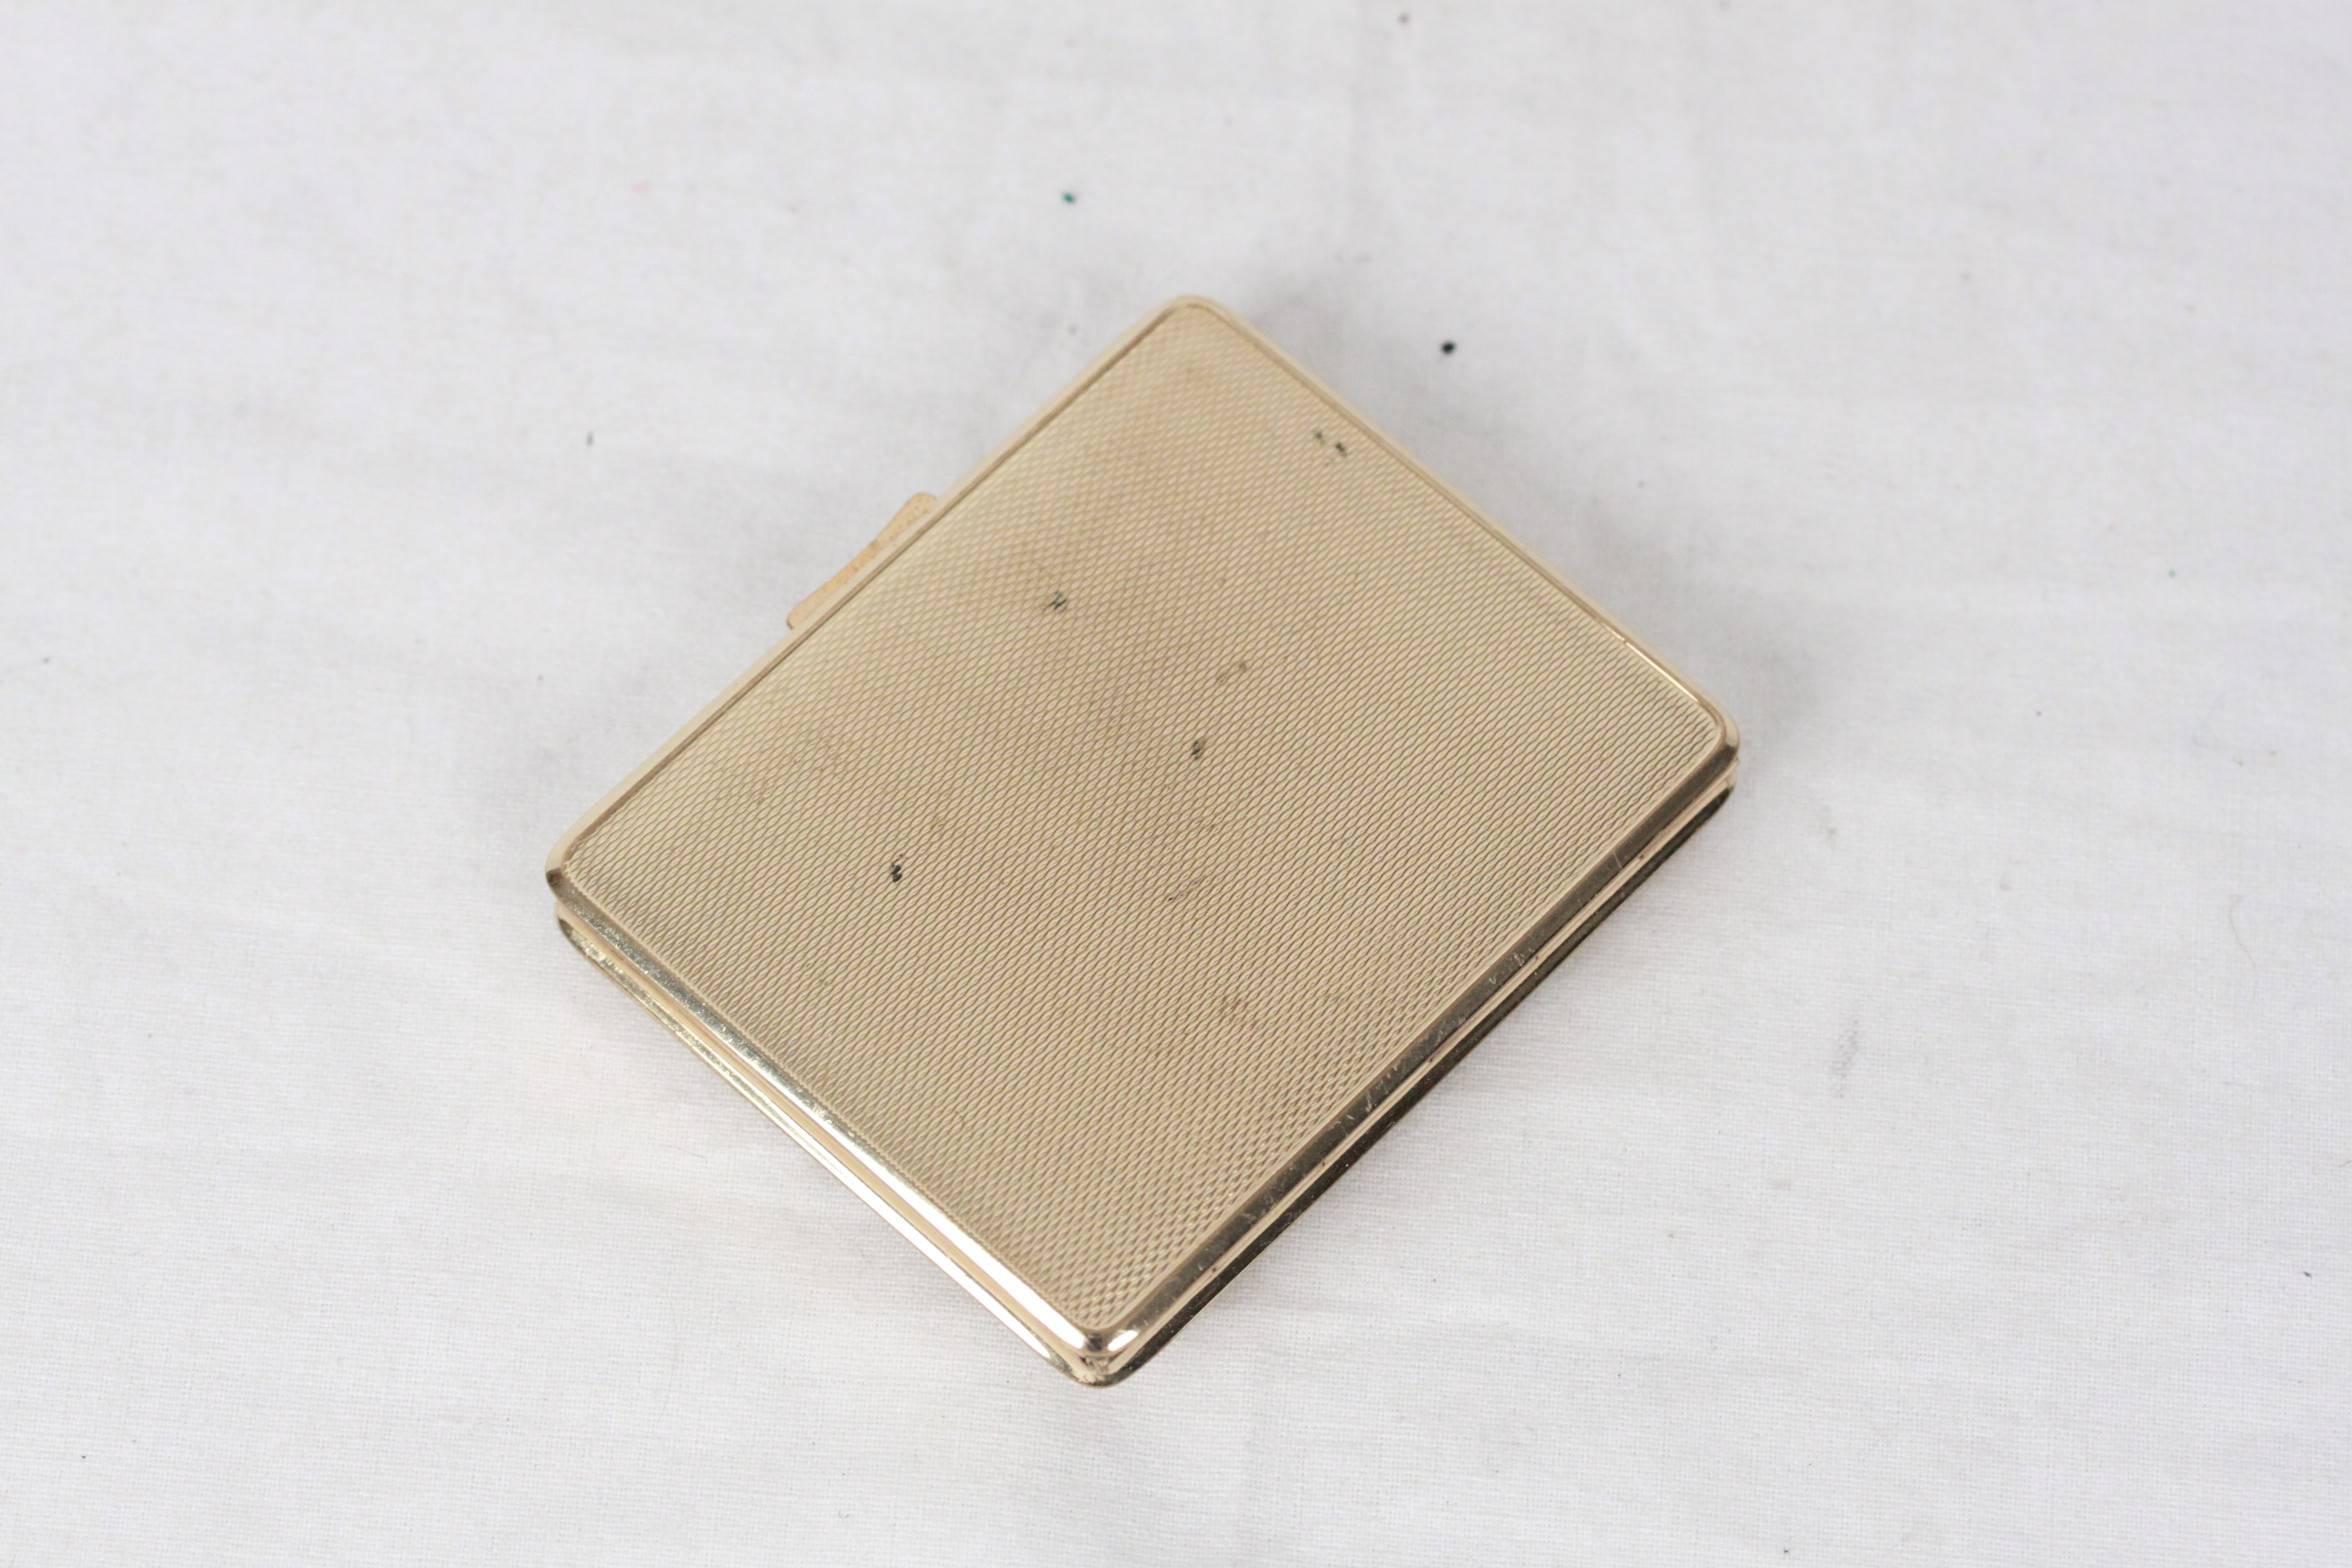 Women's VINTAGE Gold Plated 1950s Make Up POWDER COMPACT Mirrored